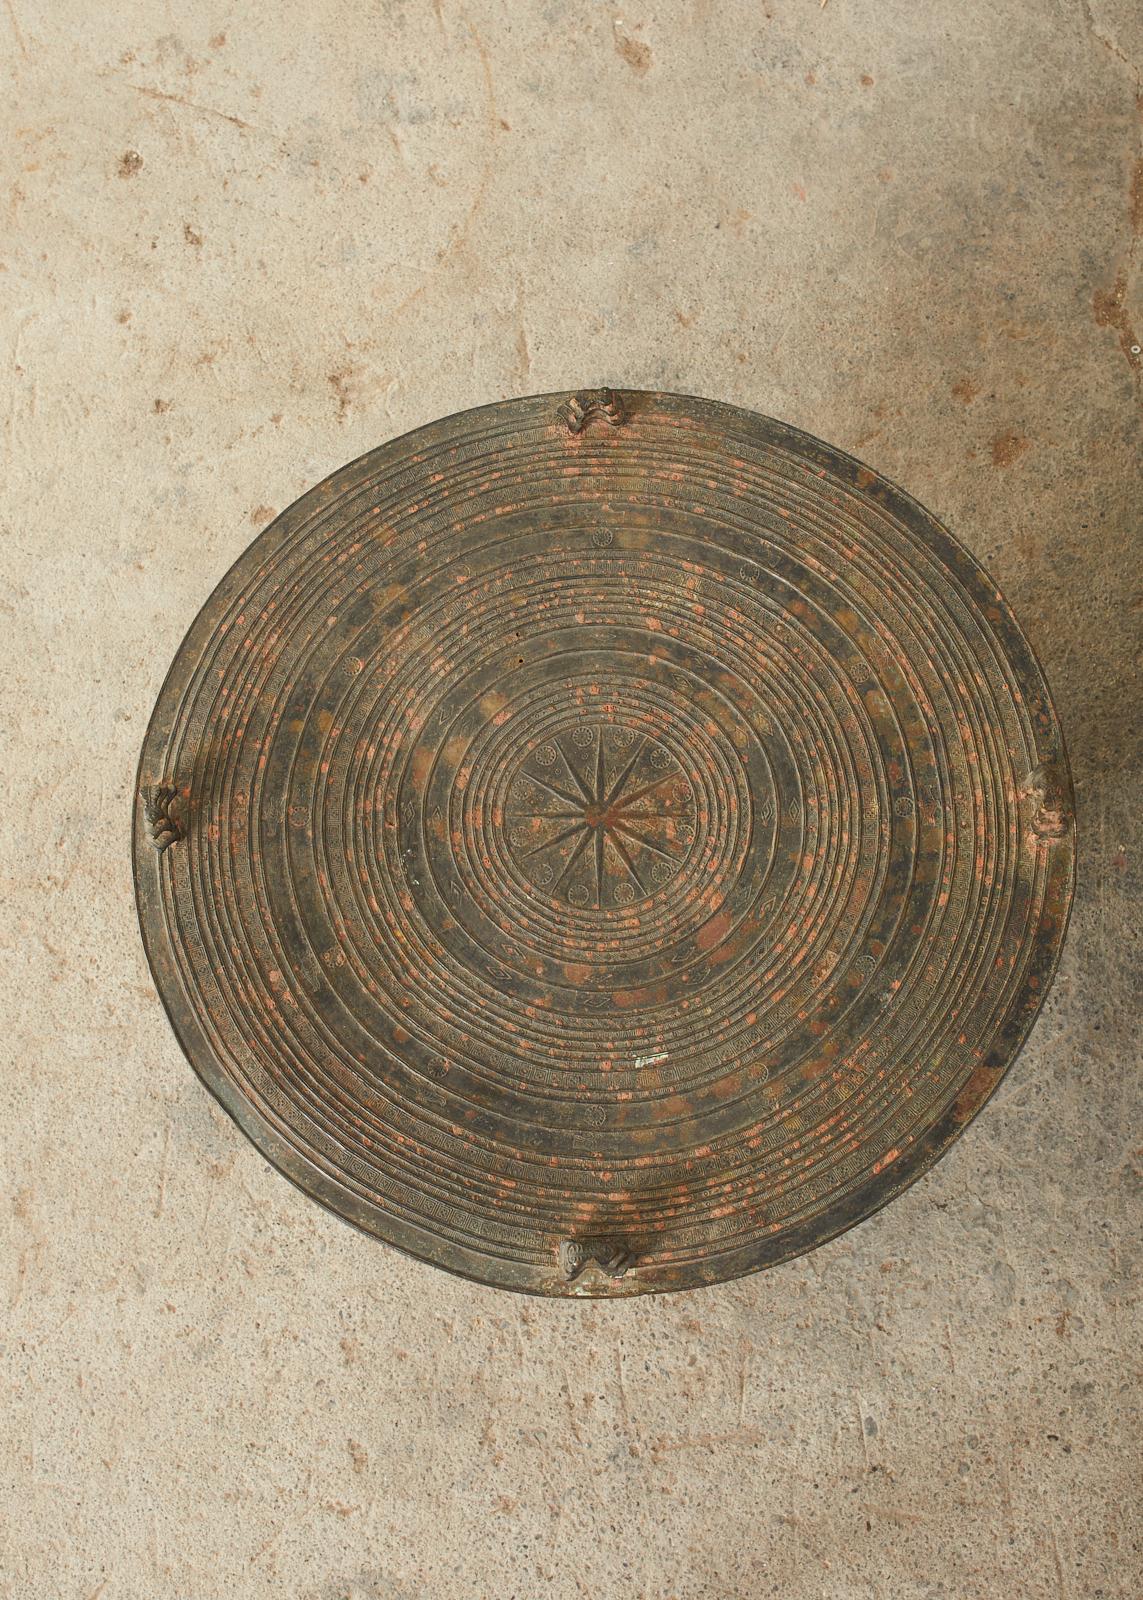 Pair of Burmese Bronze Rain Drums or Frog Drum Tables In Distressed Condition In Rio Vista, CA